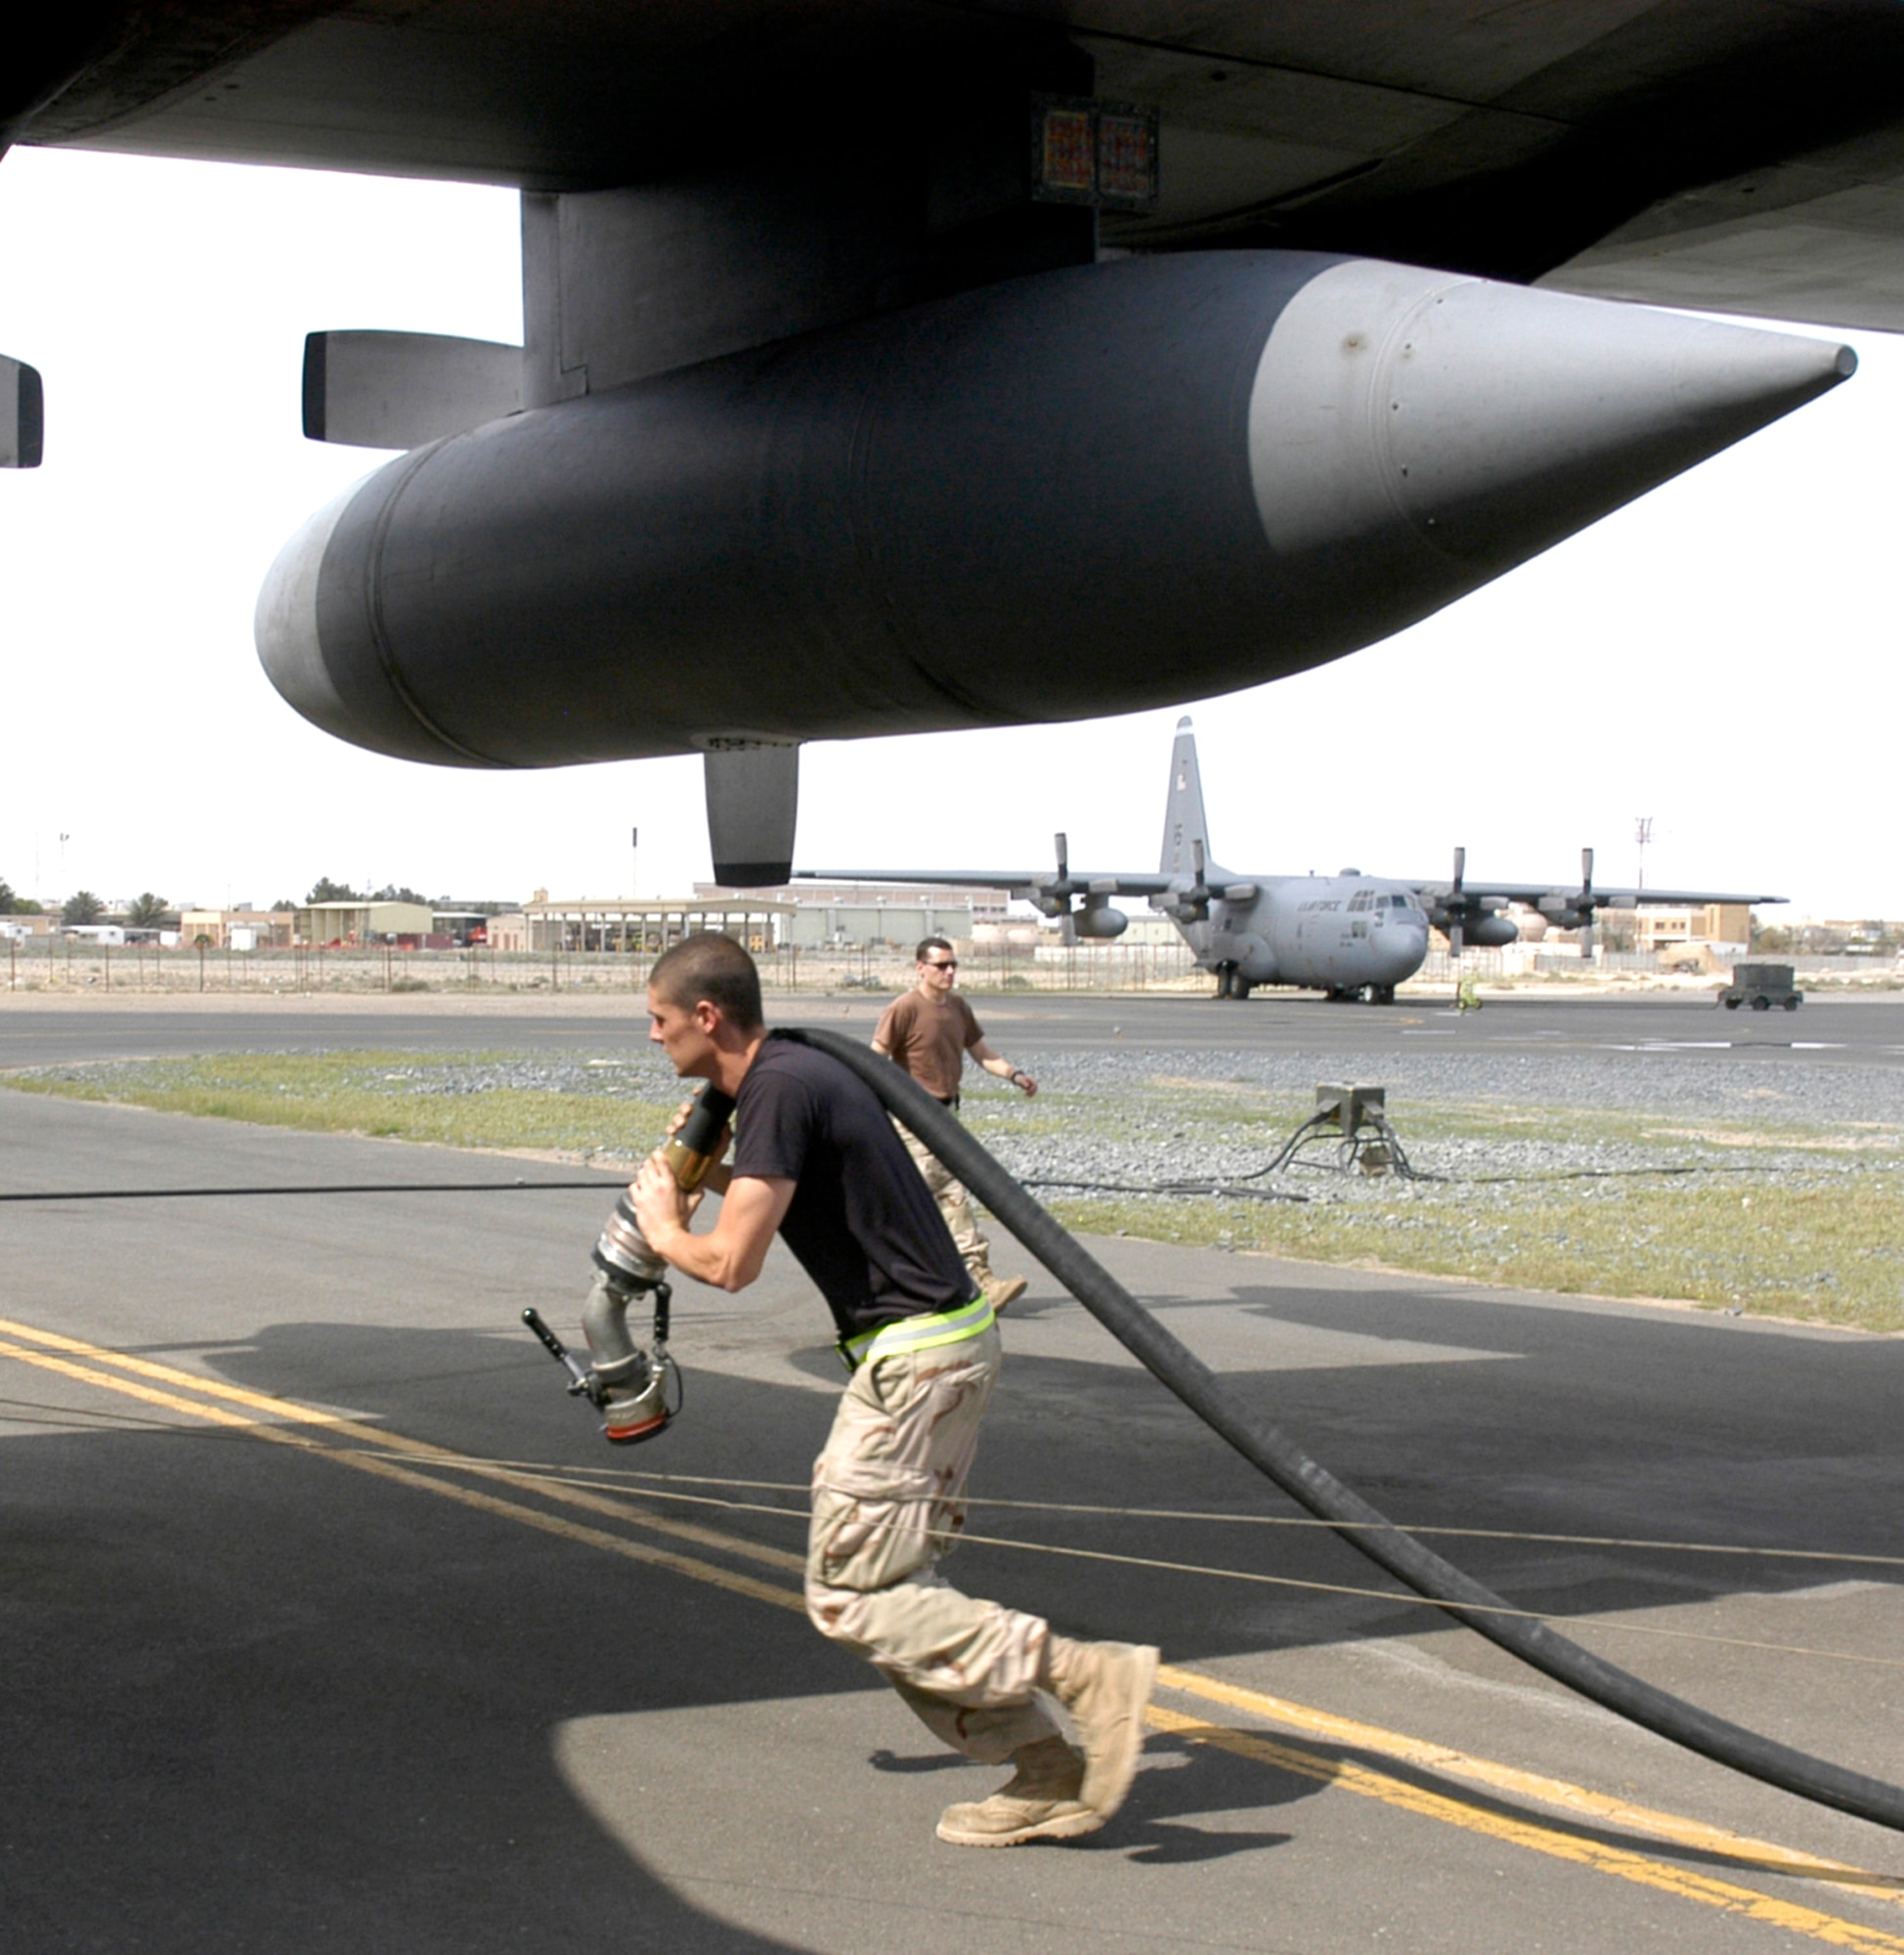 A member of the 386th Expeditionary Logistics Readiness Squadron at a forward-deployed location rushes to re-fuel a C-130 Hercules before it continues on an airlift mission. Airmen from the 386 ELRS perform a vital mission on a daily basis, pumping aproximately 100,000 to 150,000 